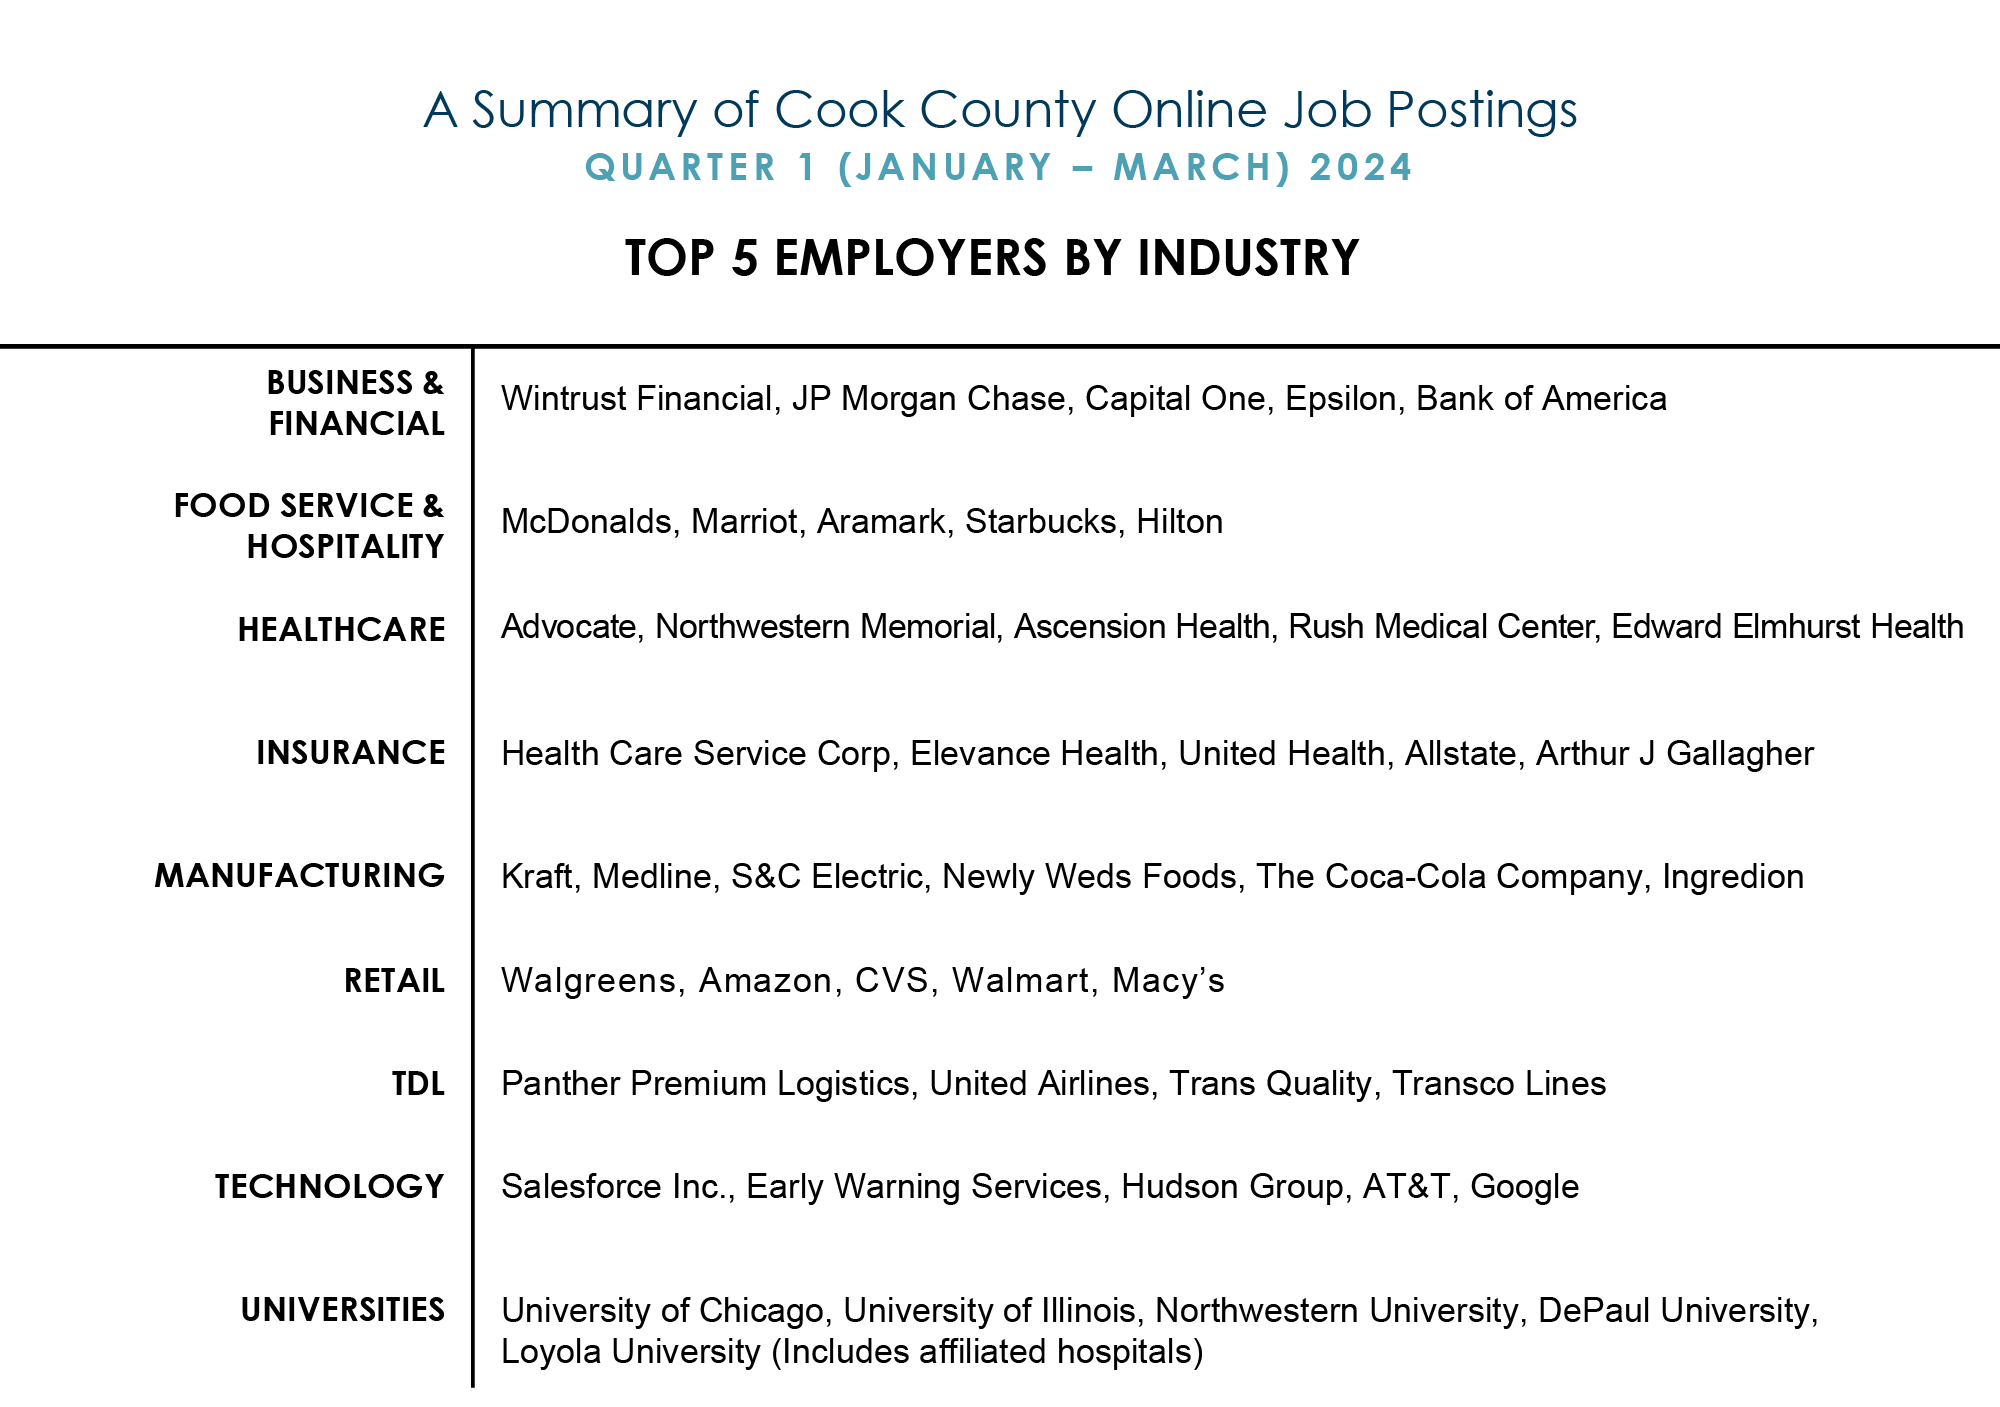 A summary of Cook County online job postings during Quarter 1 2024 (January to March). Details in the transcript.